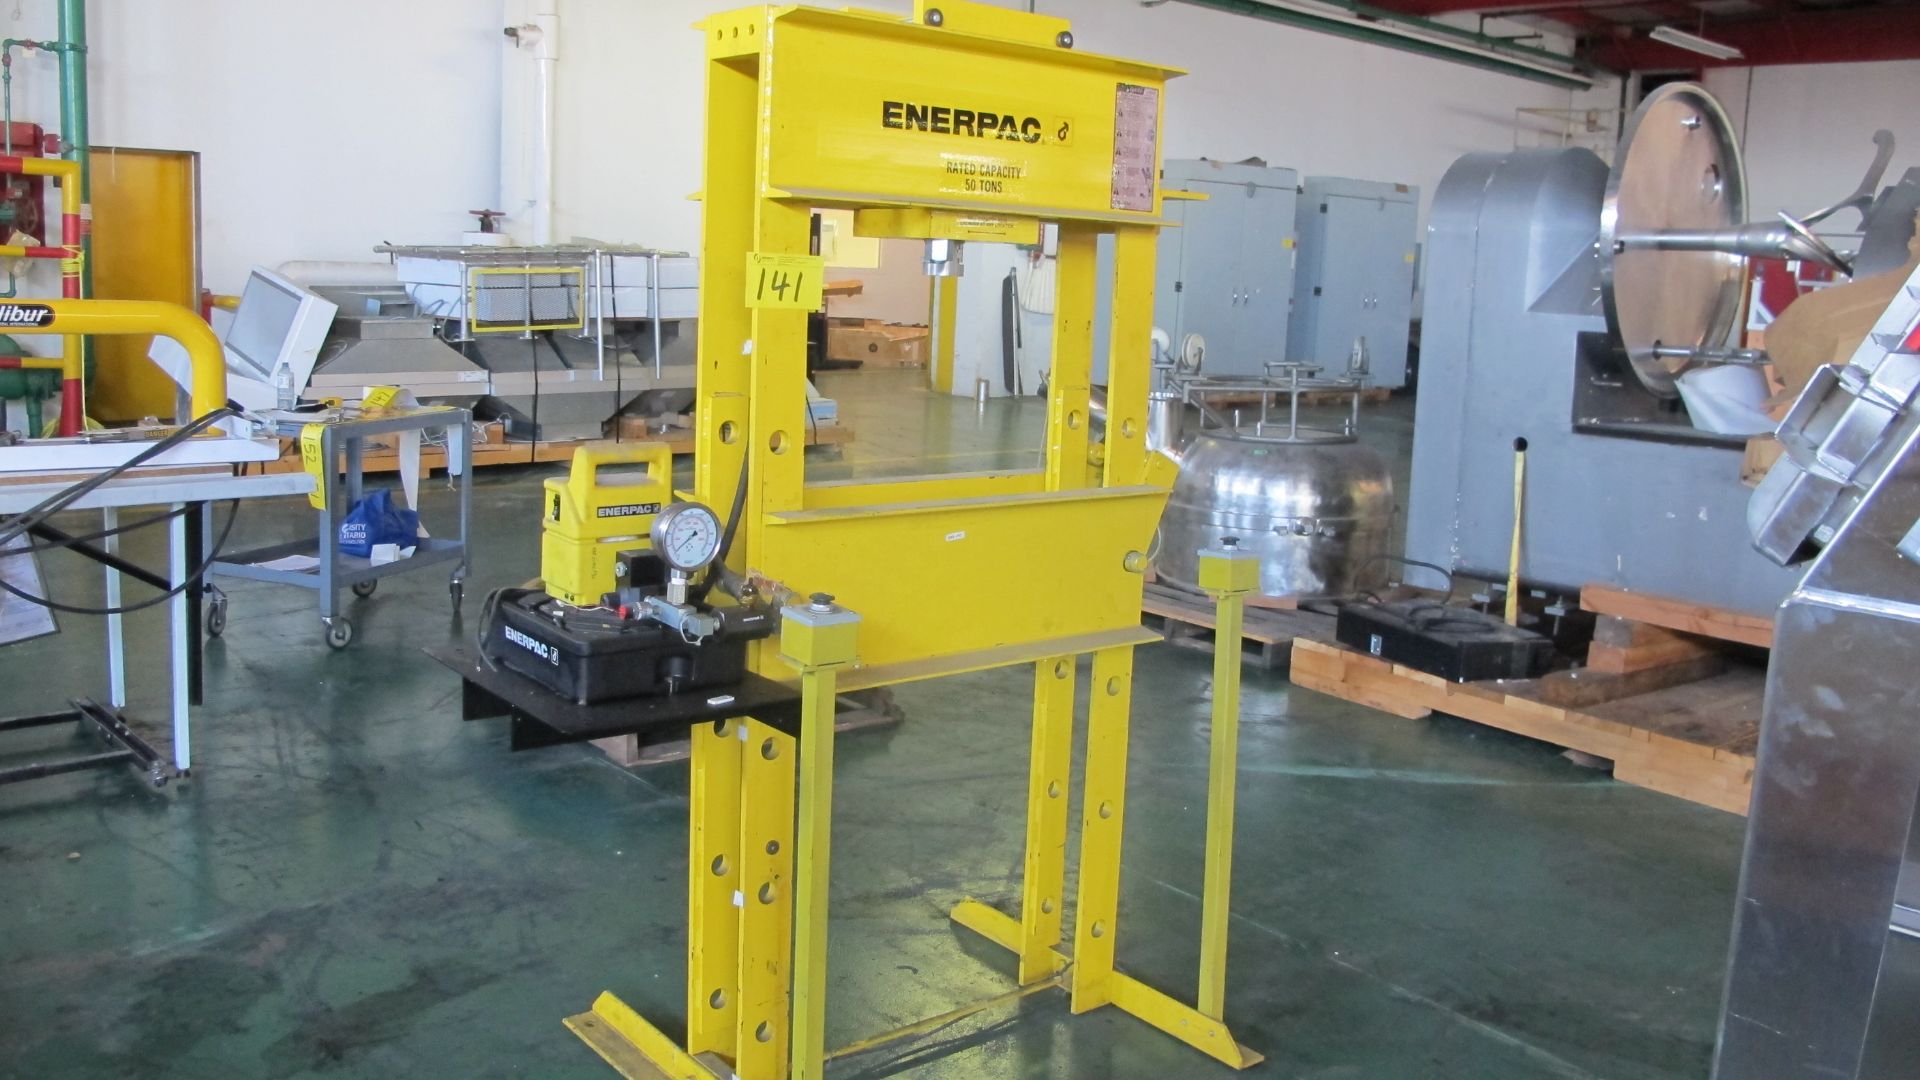 ENERPAC 50 TON CAP HYDRAULIC SHOP PRESS WITH ENERPAC POWER PACK AND FOOT PEDAL